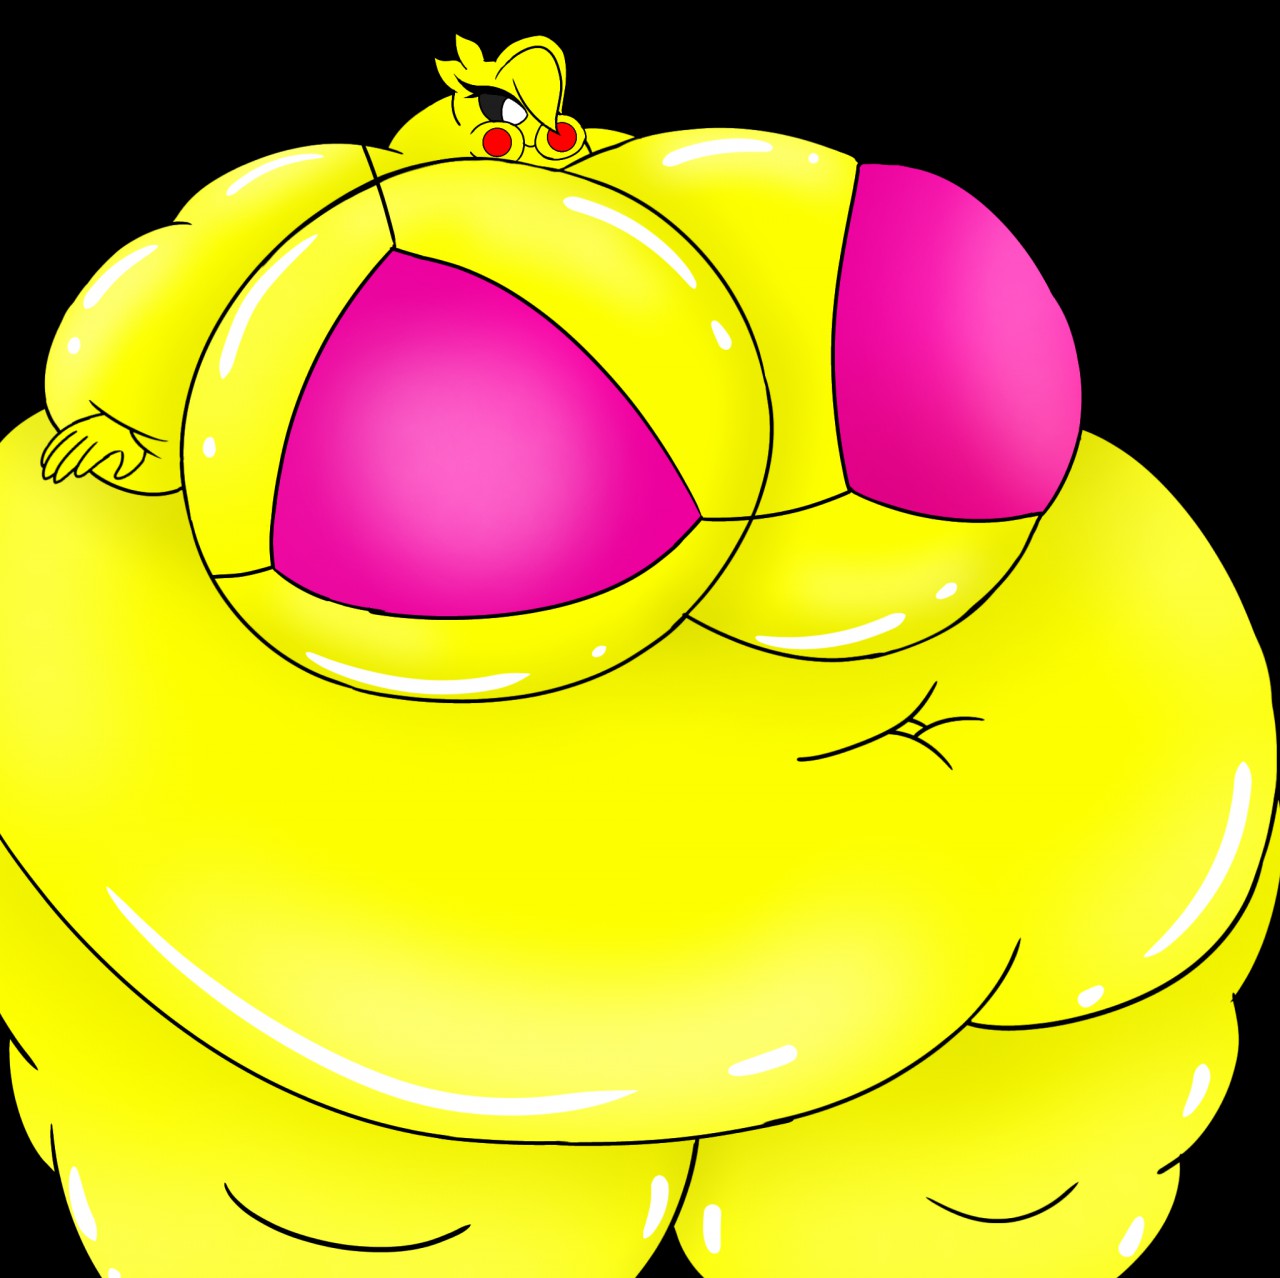 Fat toy chica